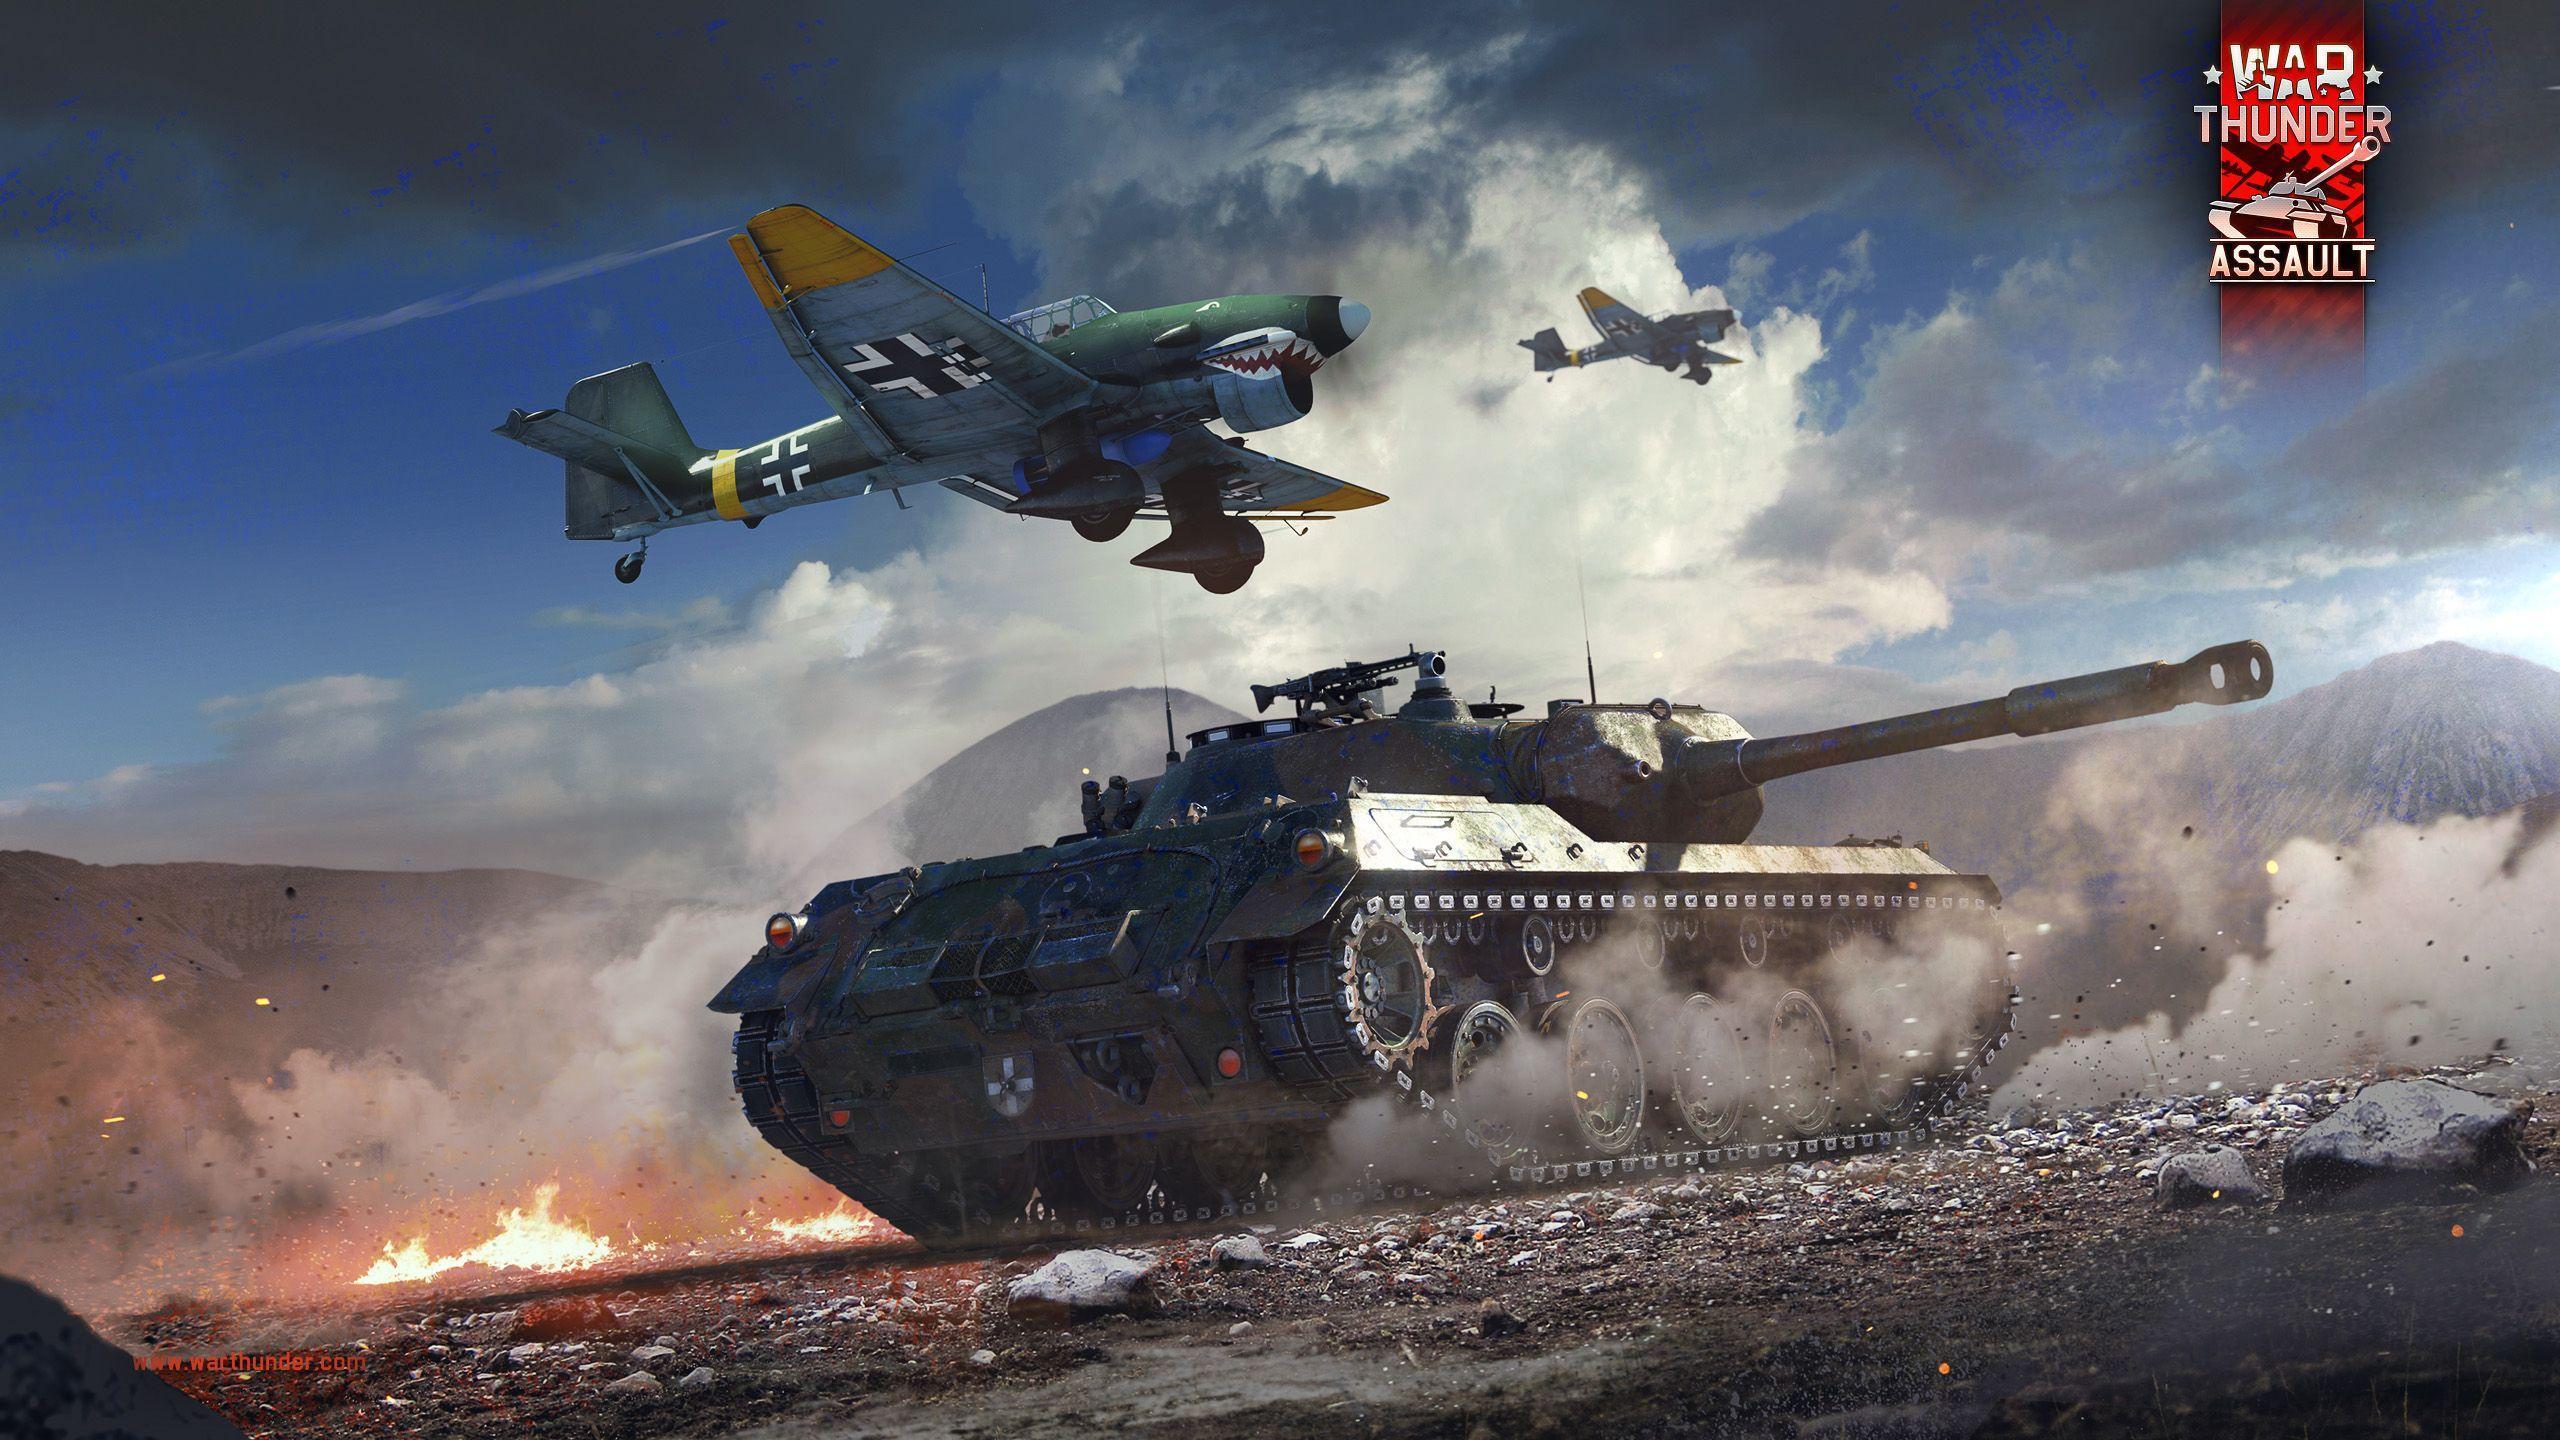 War Thunder Gen MMO Combat Game For PC, Mac, Linux